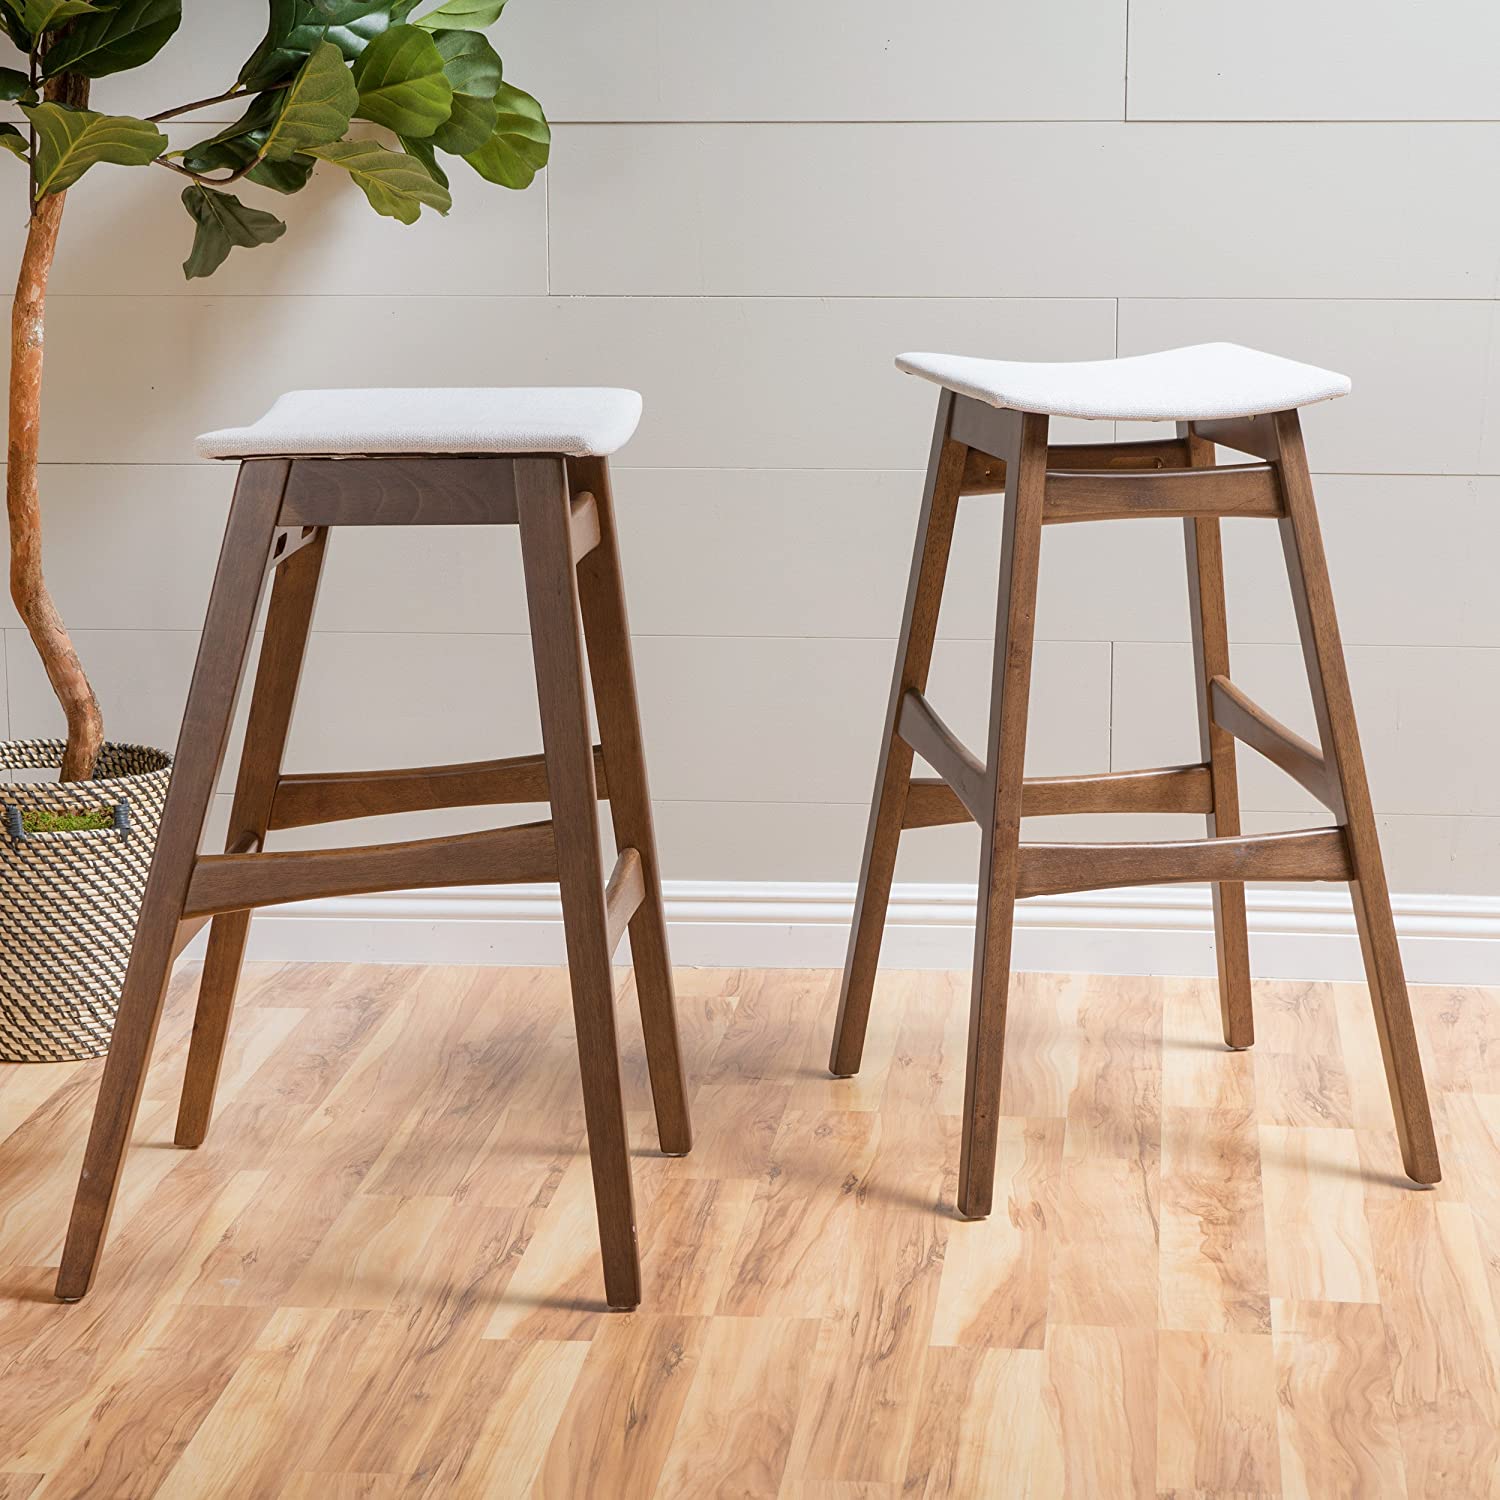 simple wooden bar stool set with white upholstered seat footrest tapered legs mid century modern seating for eat in kitchen counter height table chairs for sale online on amazon